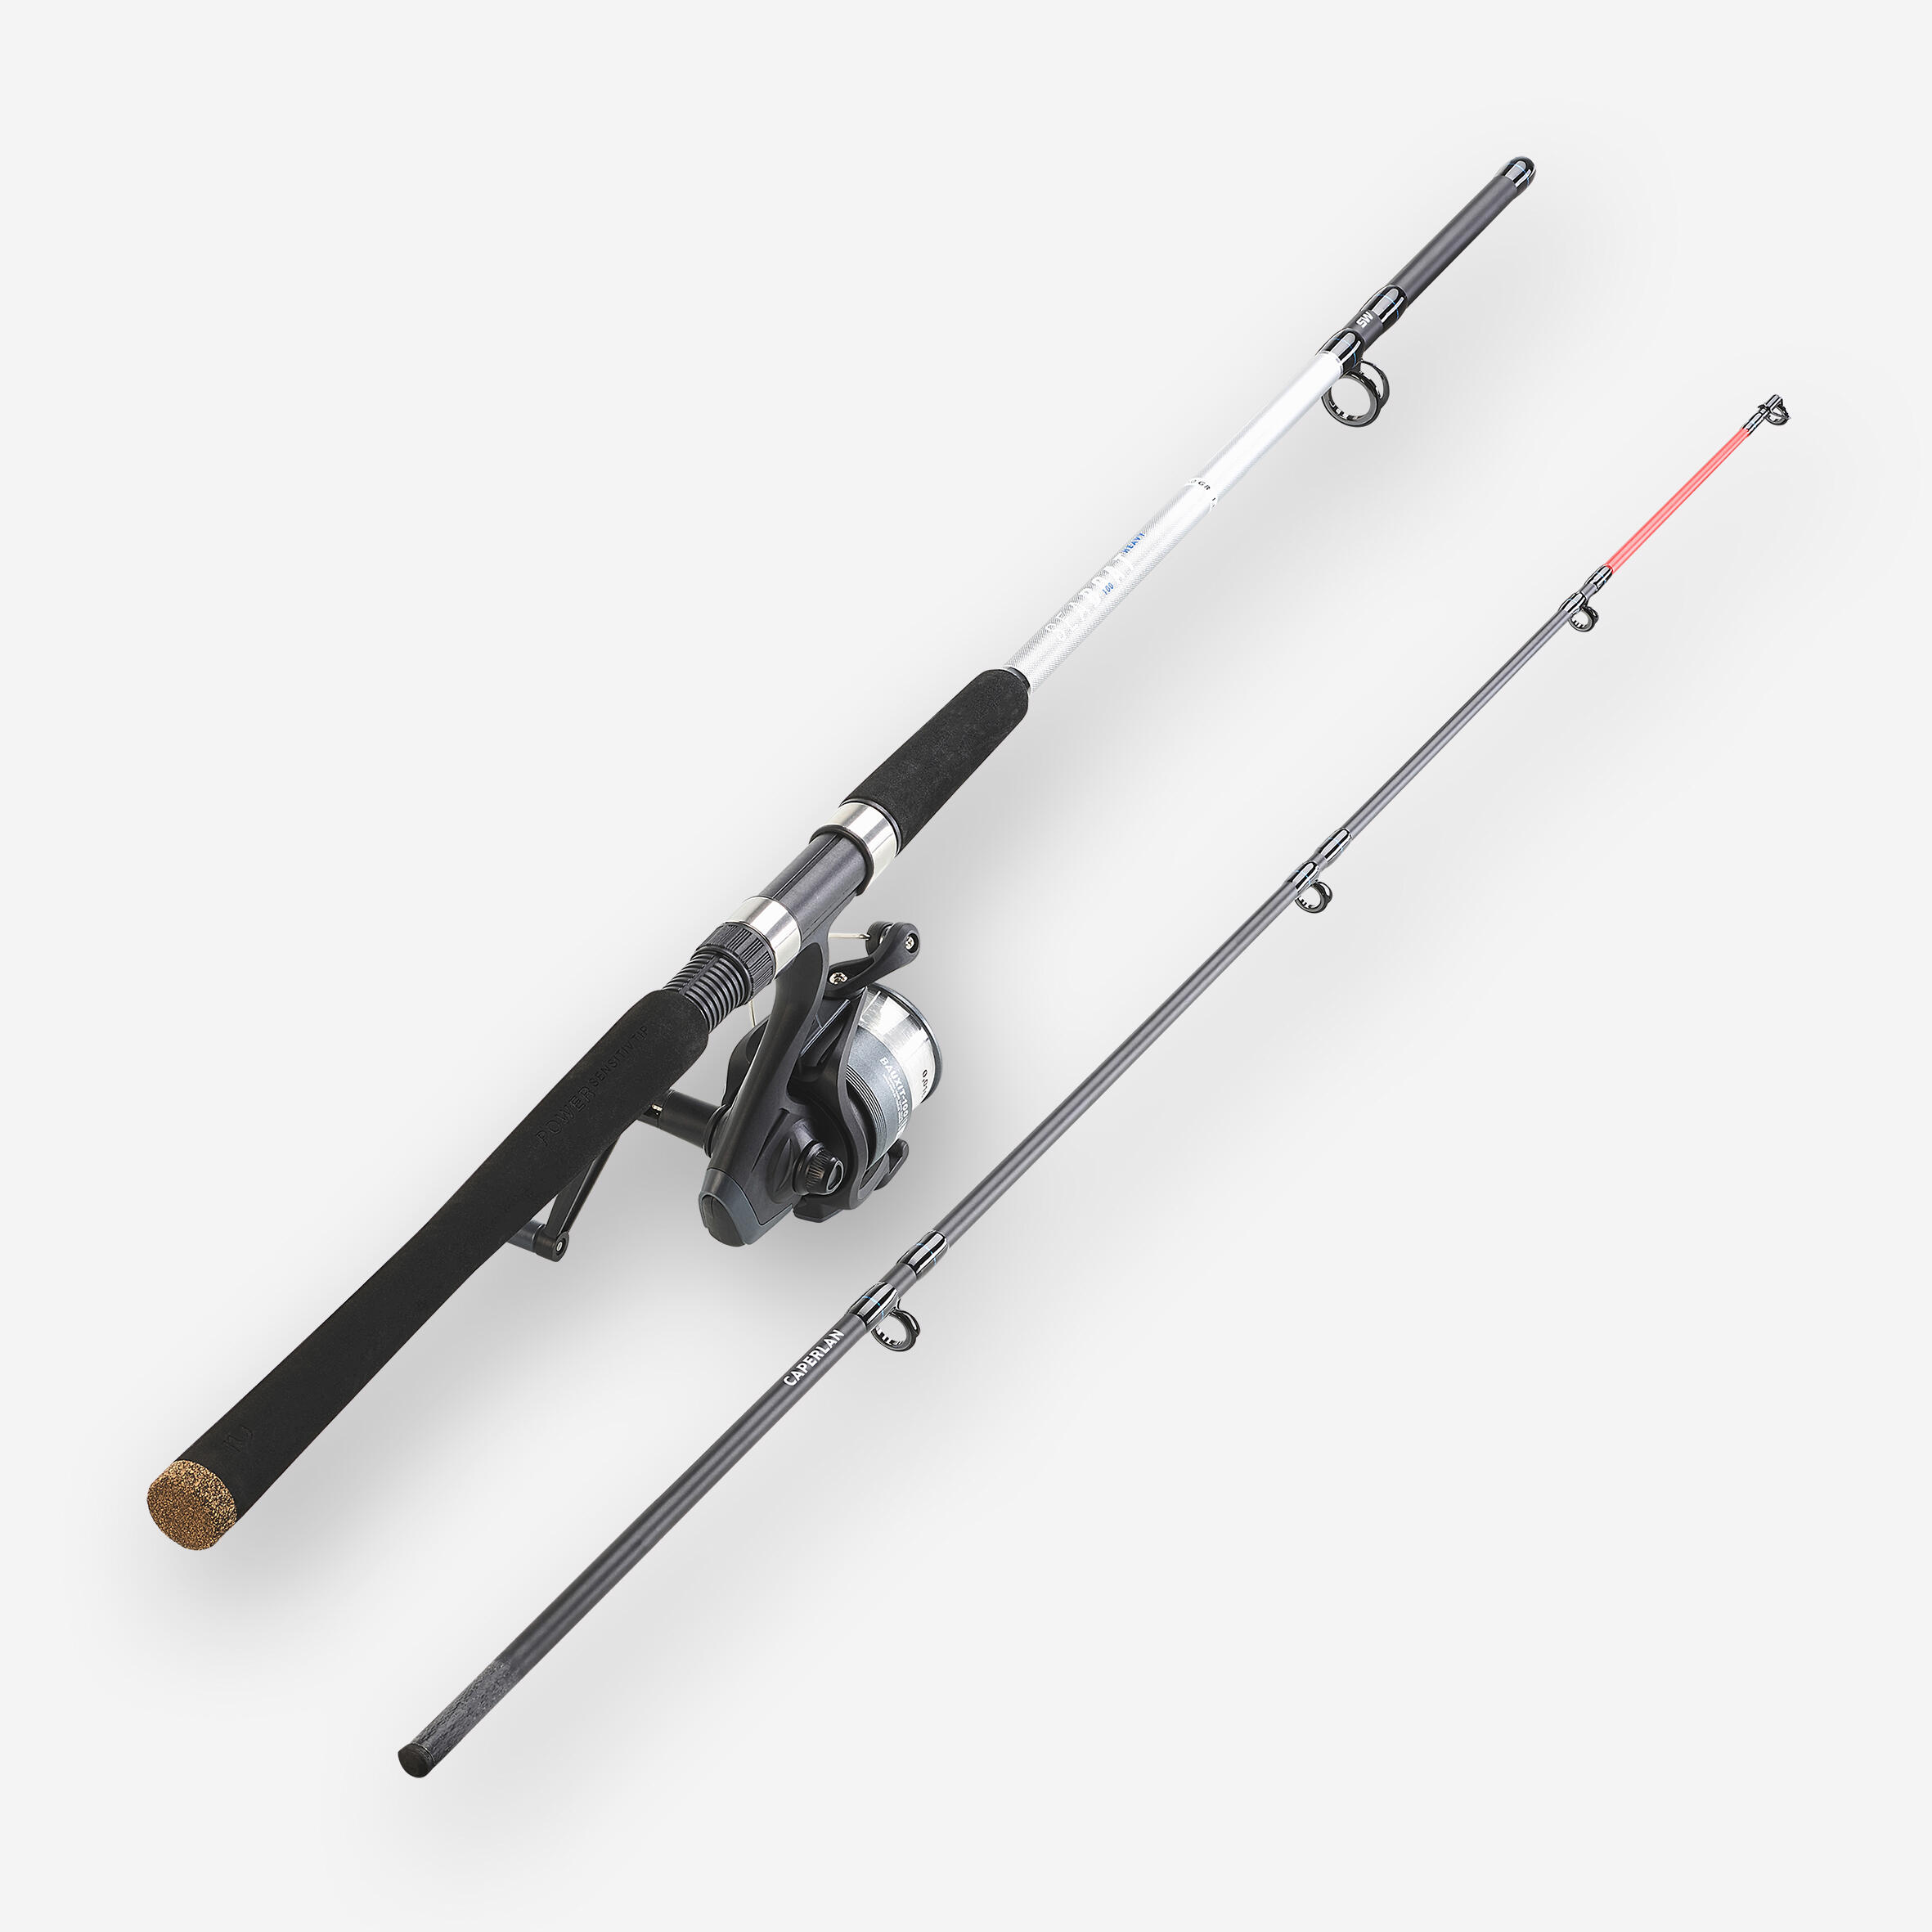 Shop Drone & Surf Rod and Reel Combos